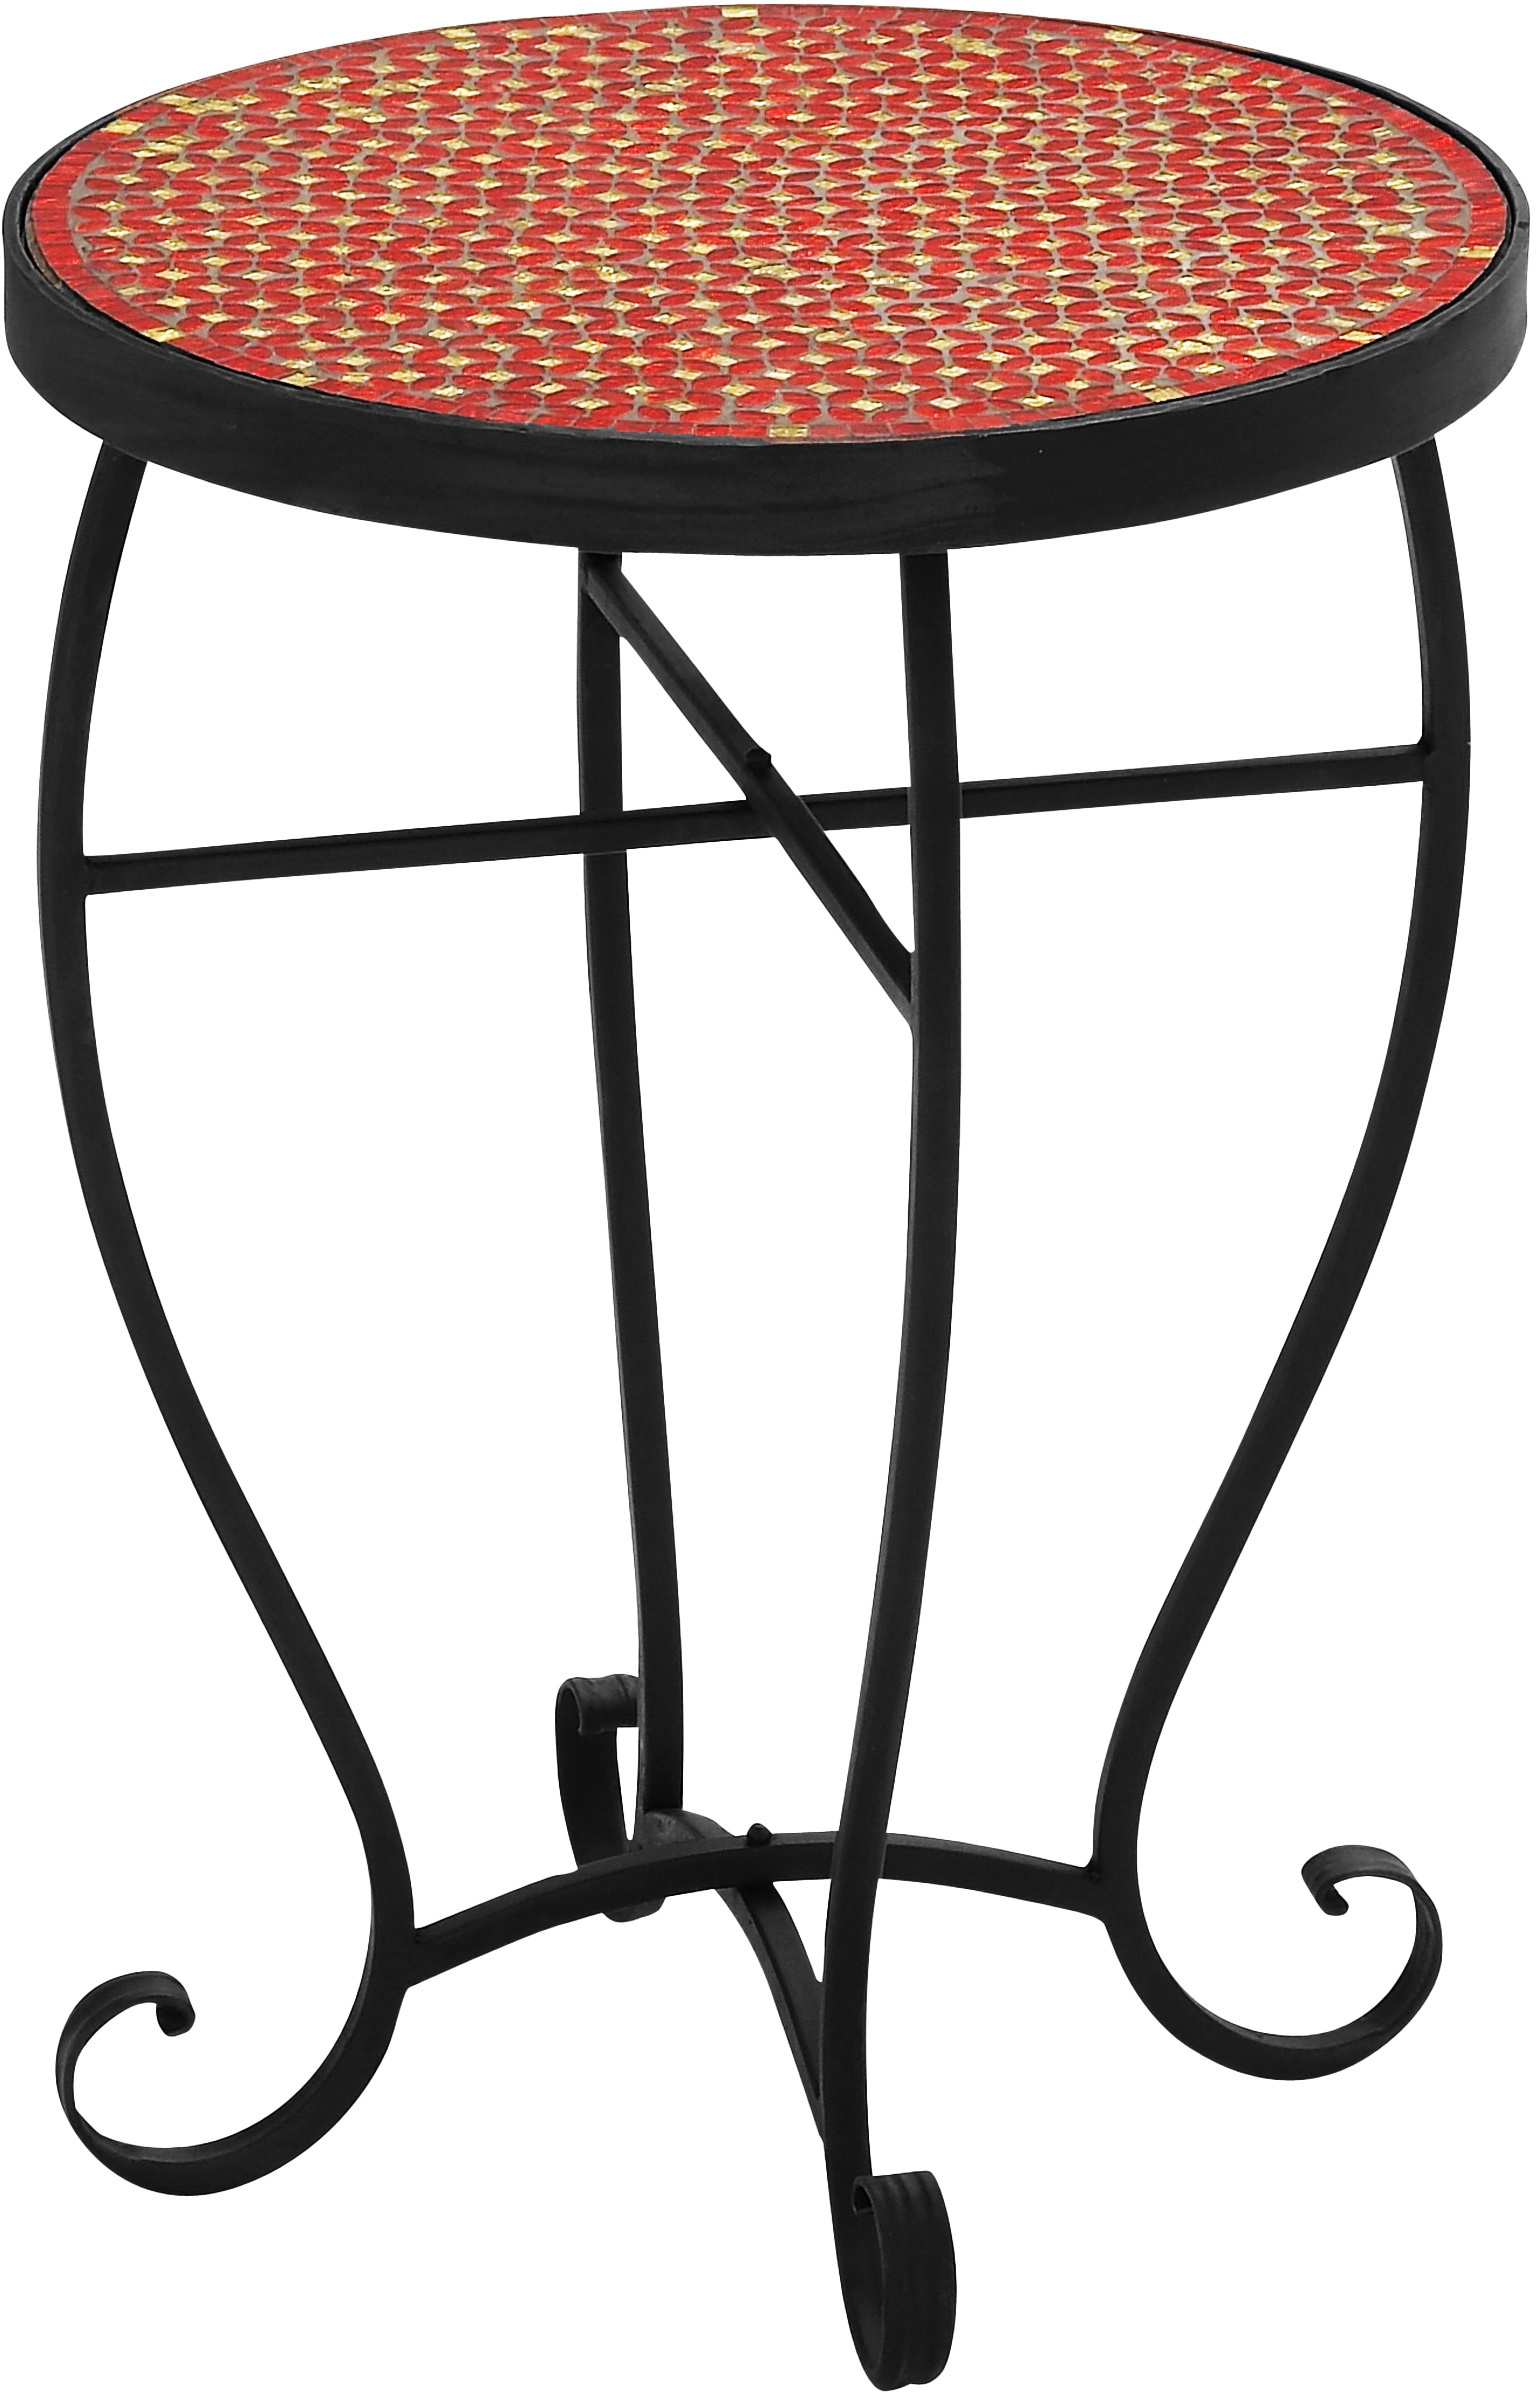 mosaic accent table outdoor moroccan red round side res zaltana indoor end contemporary patio furniture trestle dining half moon with storage affordable making small extra long